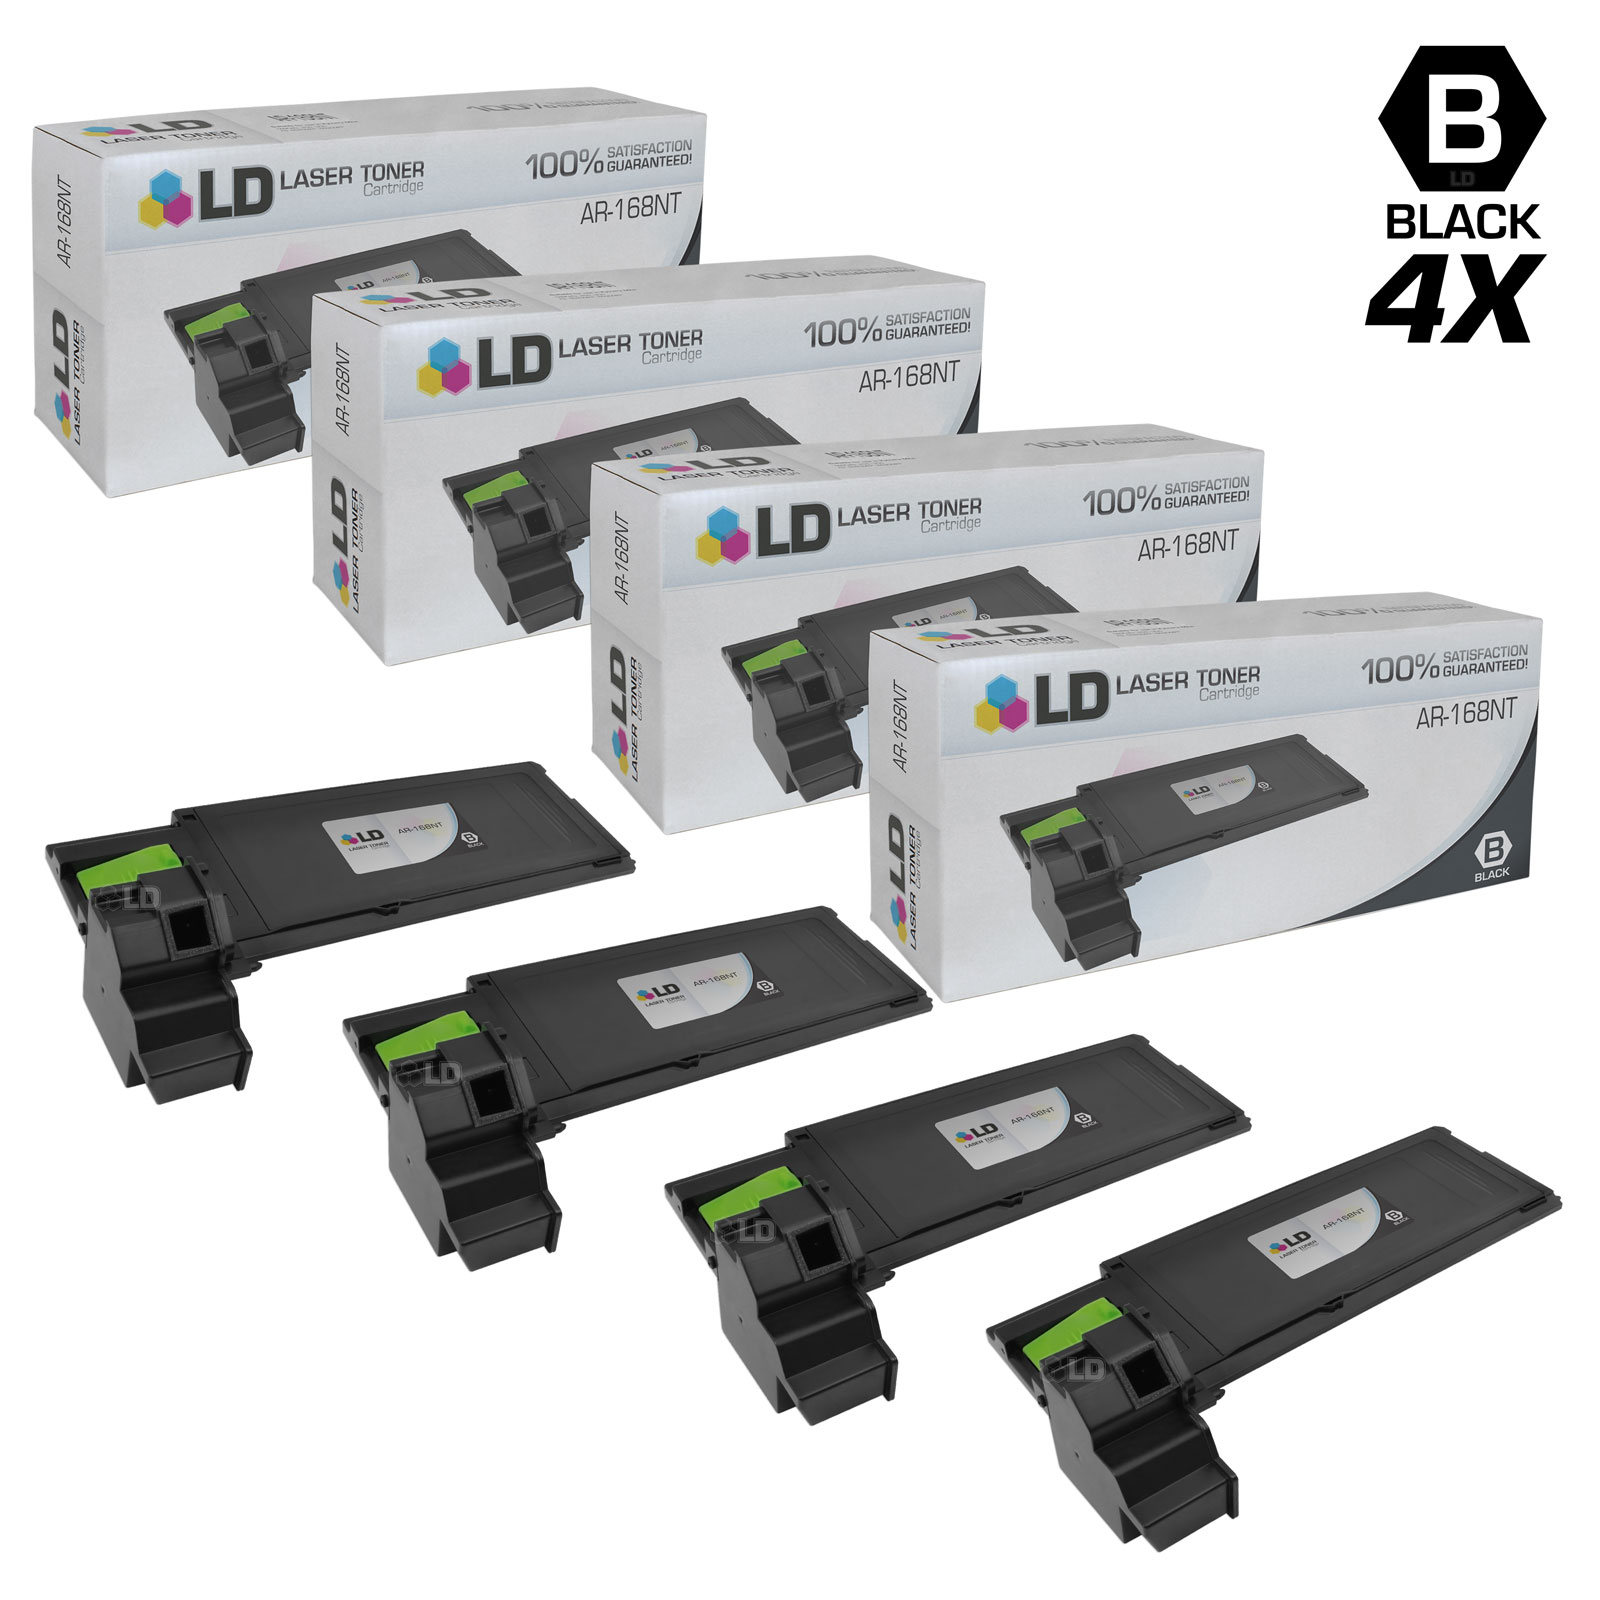 Compatible Replacements for Sharp AR-168NT Set of 4 Black Laser Toner Cartridges for use in Sharp AR 151, 152, 153E, 153EN, 156, 157, 157E, 157EN, 168D, 168S, and F152 s - image 1 of 1